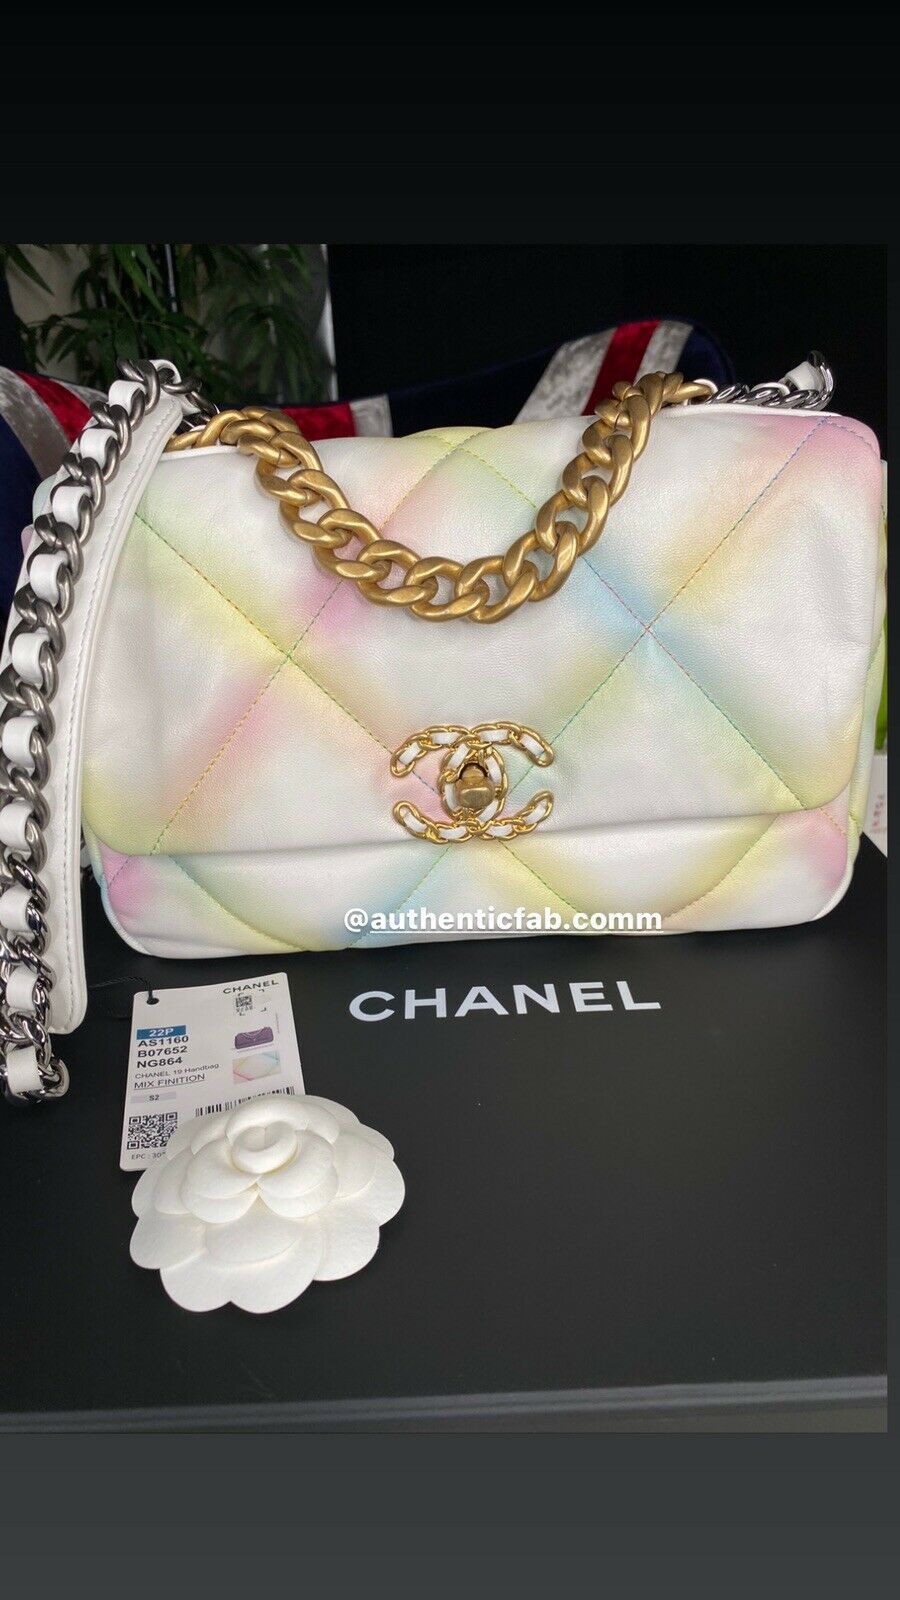 CHANEL Calfskin NWT Authentic Mini Crossbody Bag with Gold Chain